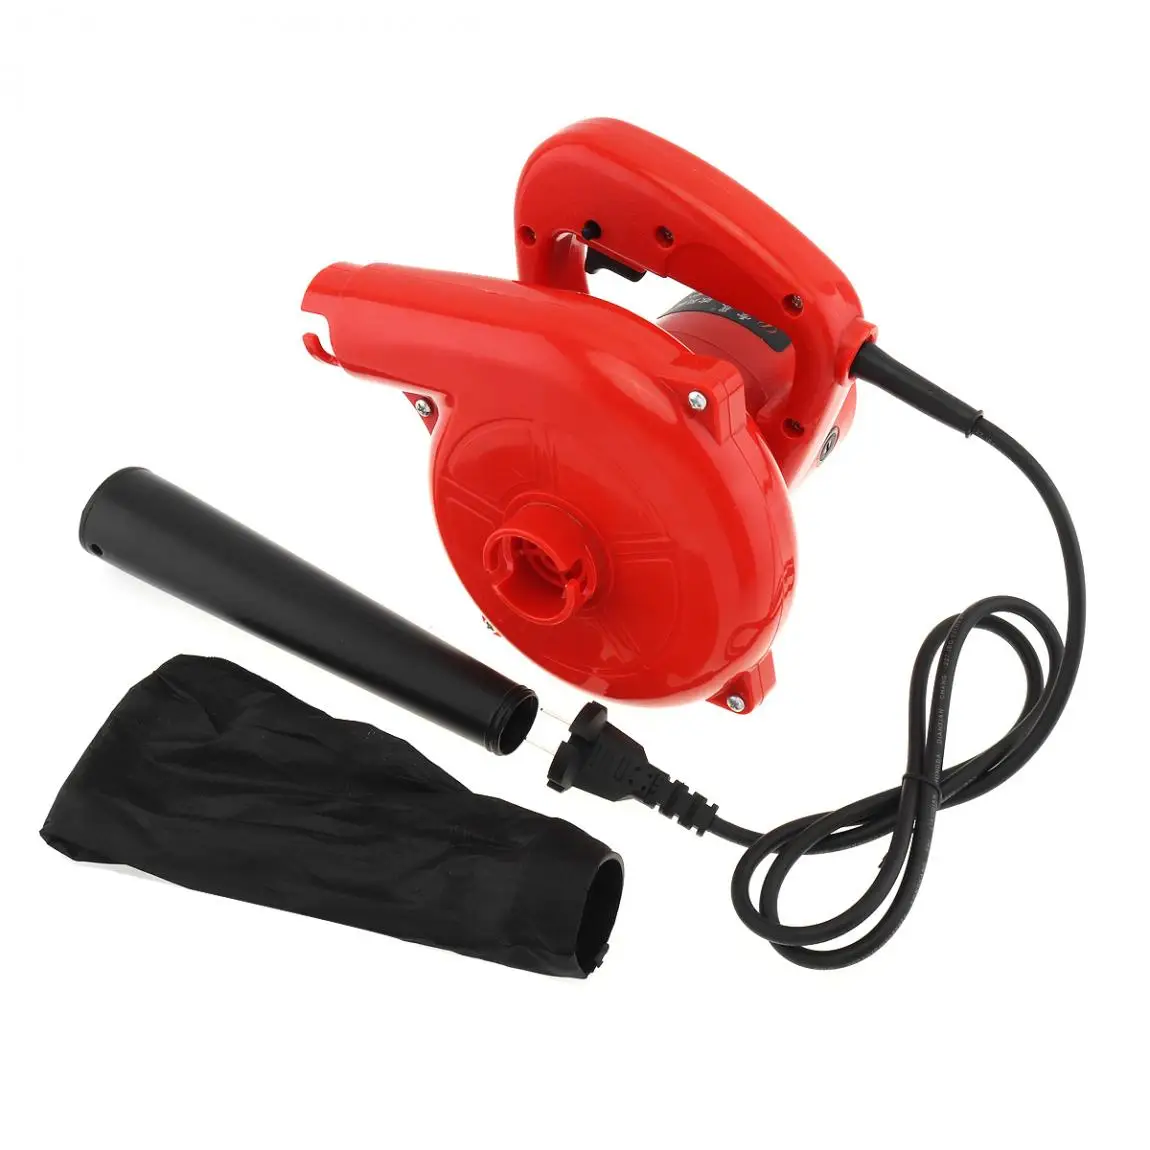 

Blowers 220V 600W Multifunctional Portable Electric Blower Dust Collector with Suction Head and Collecting Bag for Removing Dust